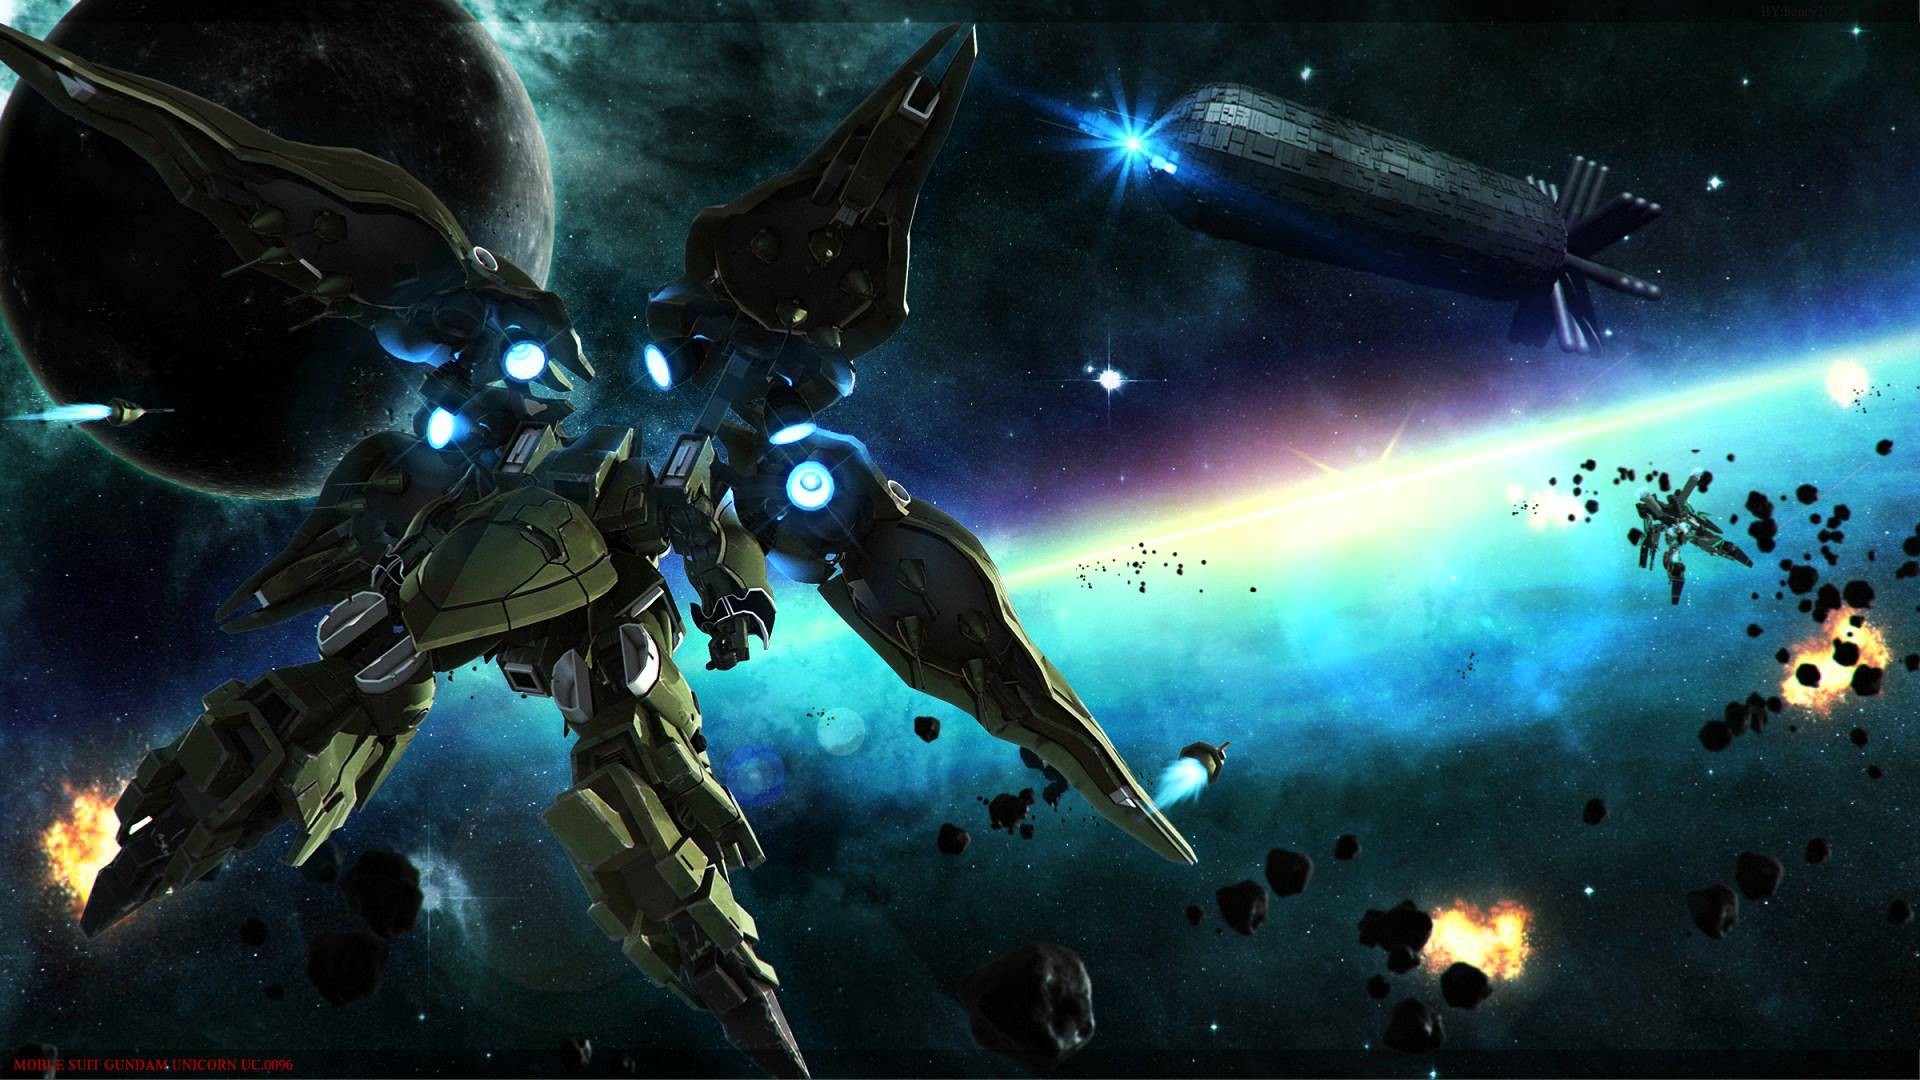 Gundam Background Wallpaper HD With high-resolution 1920X1080 pixel. You can use this wallpaper for your Desktop Computer Backgrounds, Mac Wallpapers, Android Lock screen or iPhone Screensavers and another smartphone device